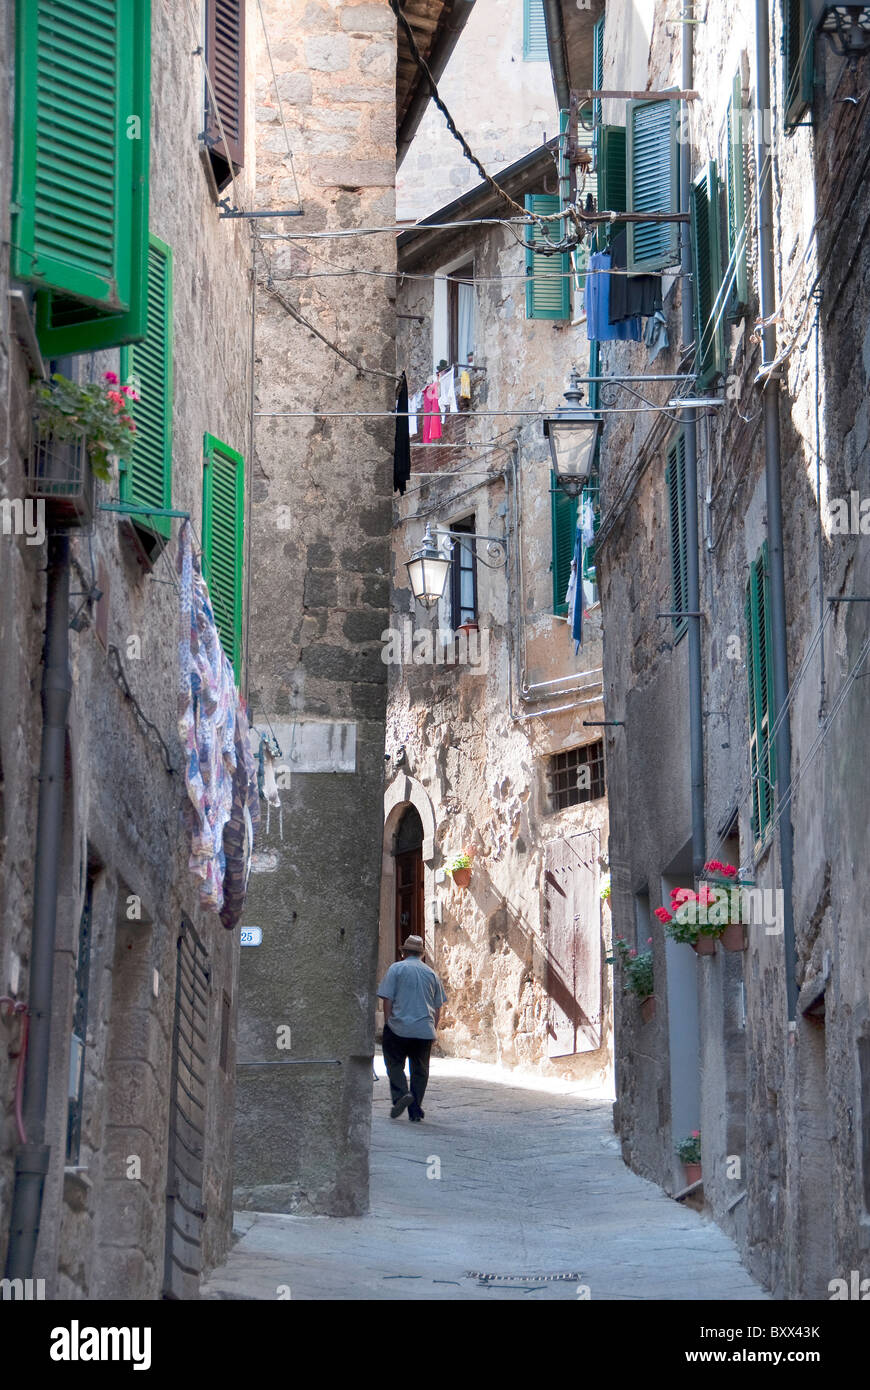 Back view of male tourist walking up the narrow streets of Piancastagnaio on the slopes of Mount Amiata, Tuscany Italy Stock Photo